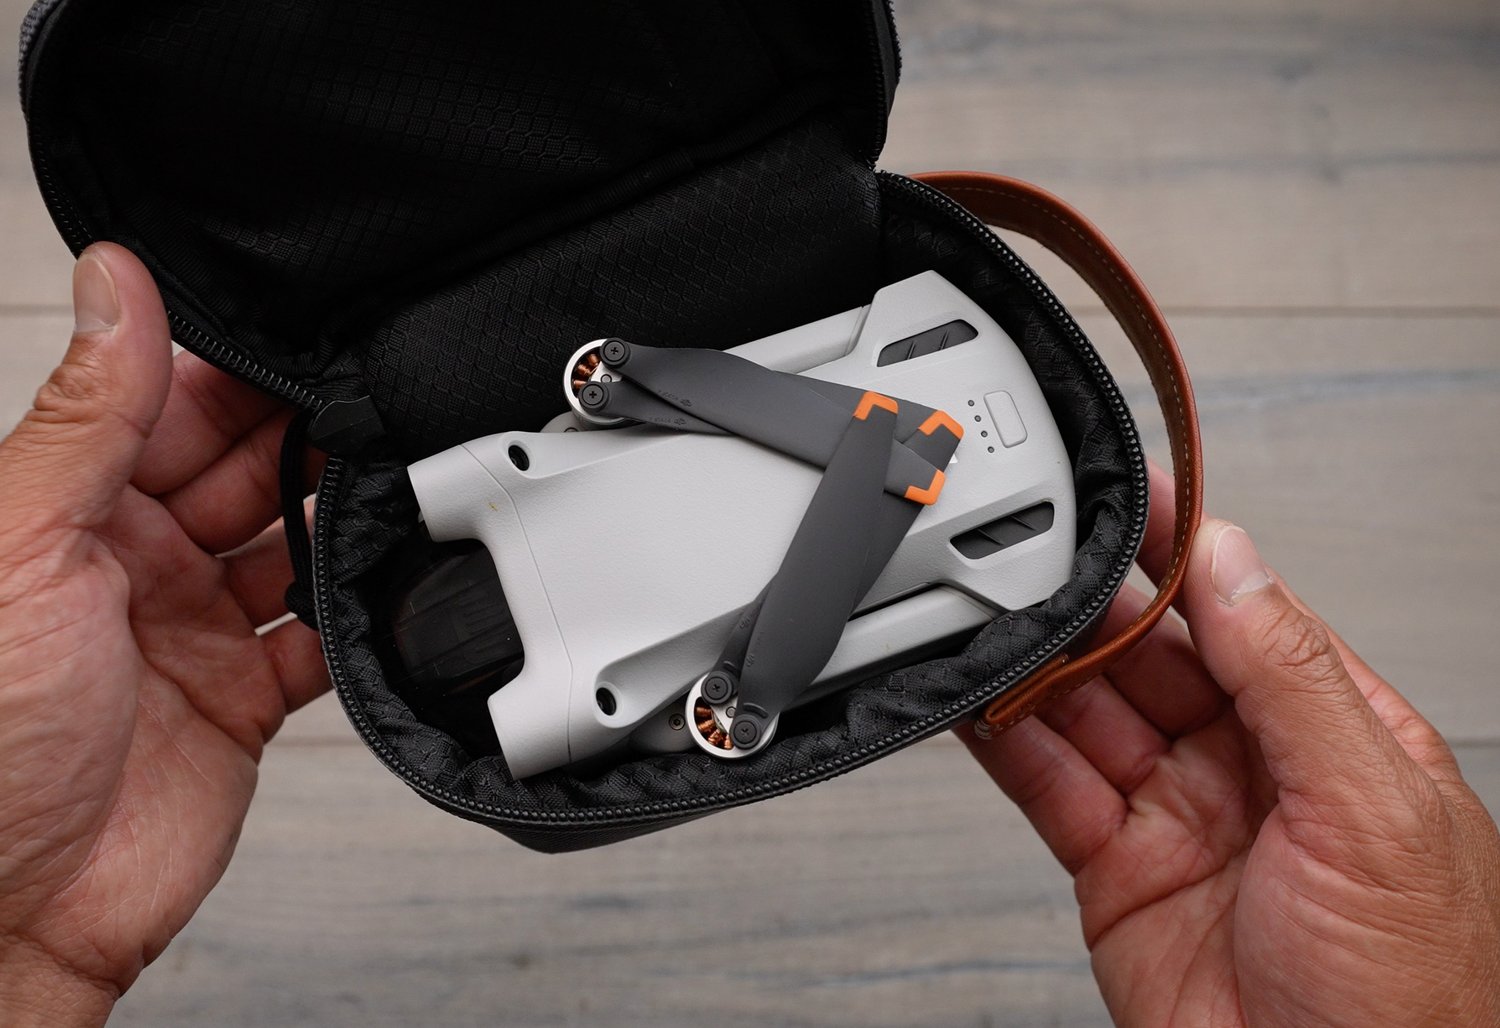  ProCase Carrying Case for DJI Mini 2 DJI Mini 2 Fly More Combo  and Accessories, Hard Shockproof Storage Travel Case with Shoulder Strap :  Electronics